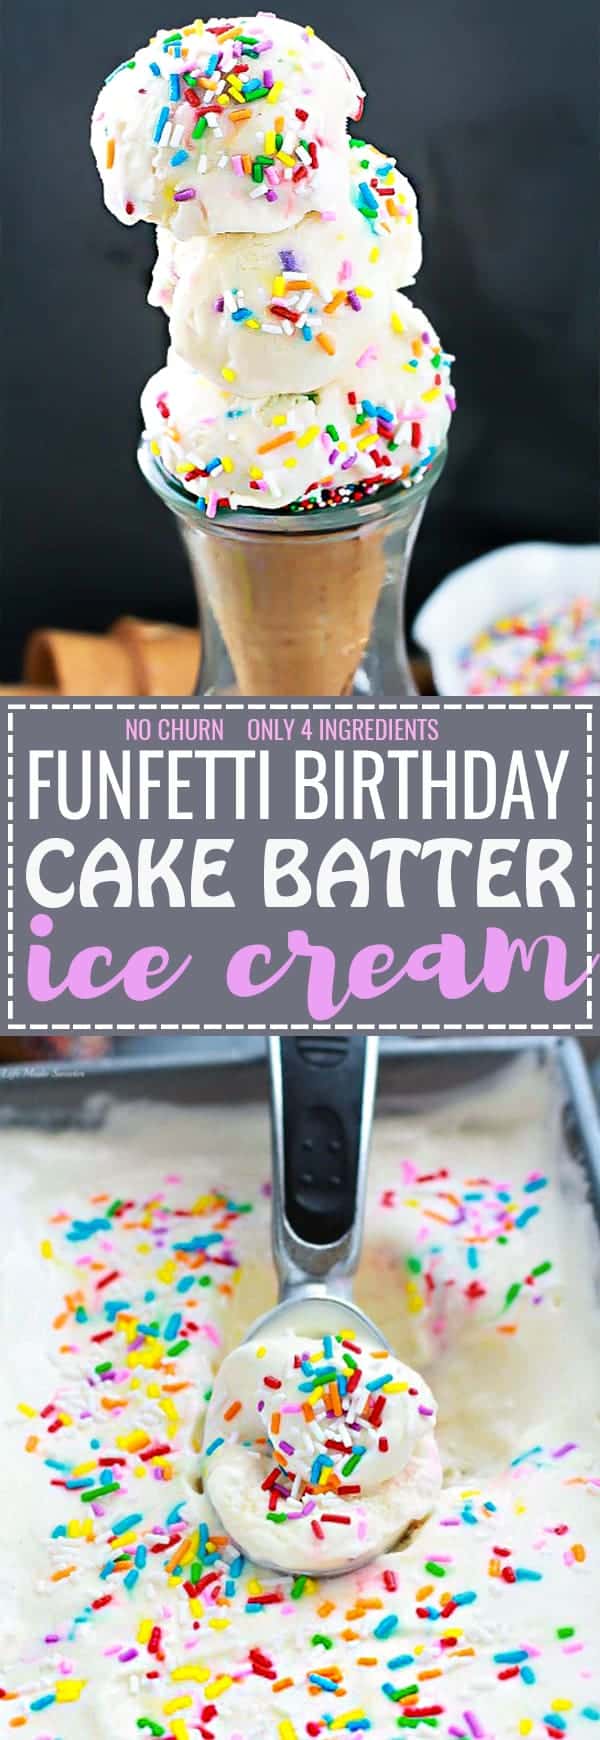 No Churn Cake Batter Ice Cream Funfettii - the easiest & creamiest birthday cake ice cream ever. With ONLY 4 ingredients and so simple to make. Best of all, NO ice cream maker and skip that stop to Cold Stone Creamery! The perfect summer treat for a birthday or any other occasion!